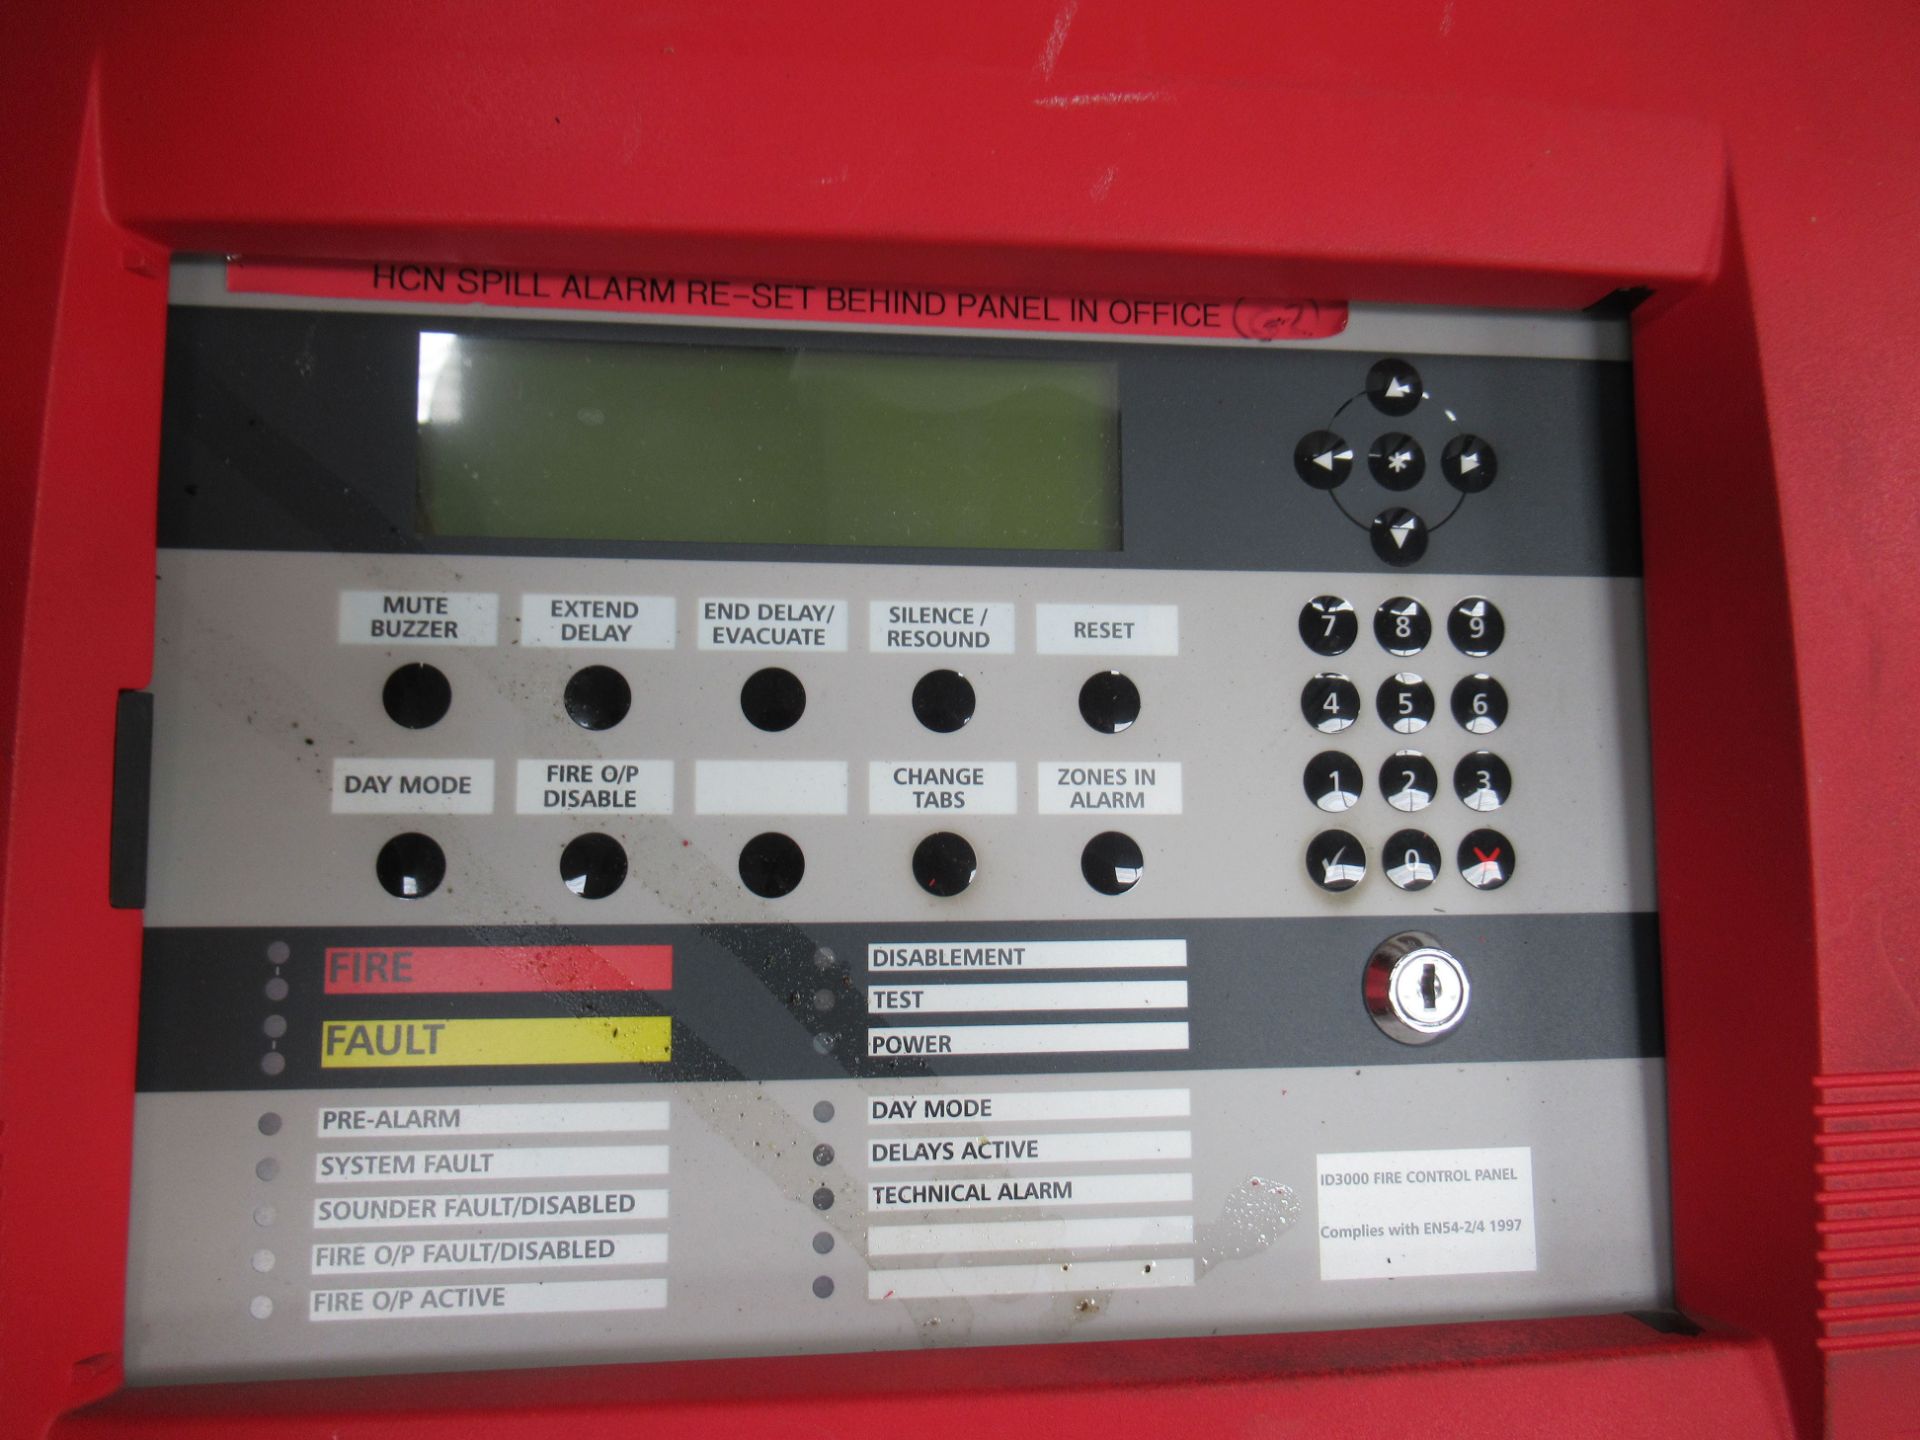 Notifier by Honeywell Fire Alarm System/Panel - Image 2 of 2